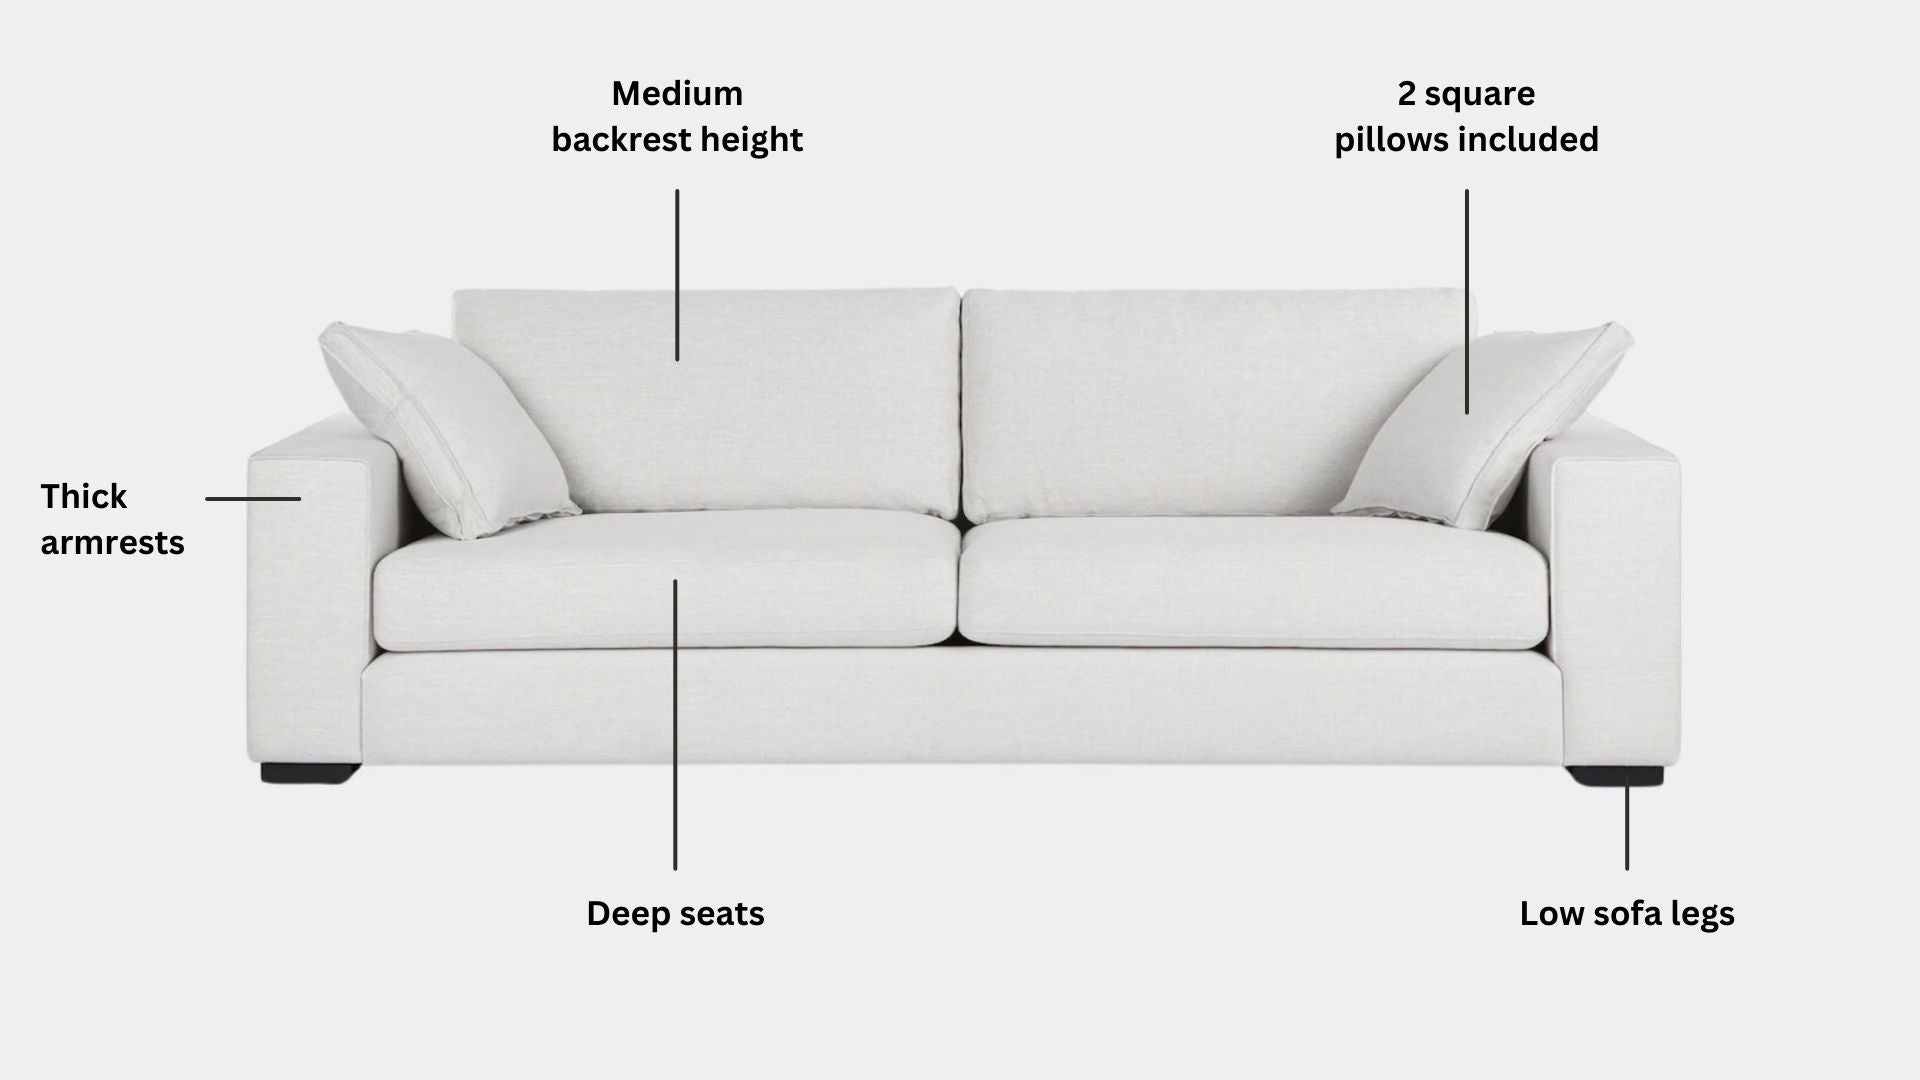 Key features such as armrest thickness, cushion height, seat depth and sofa leg height for Coastal Fabric Sofa